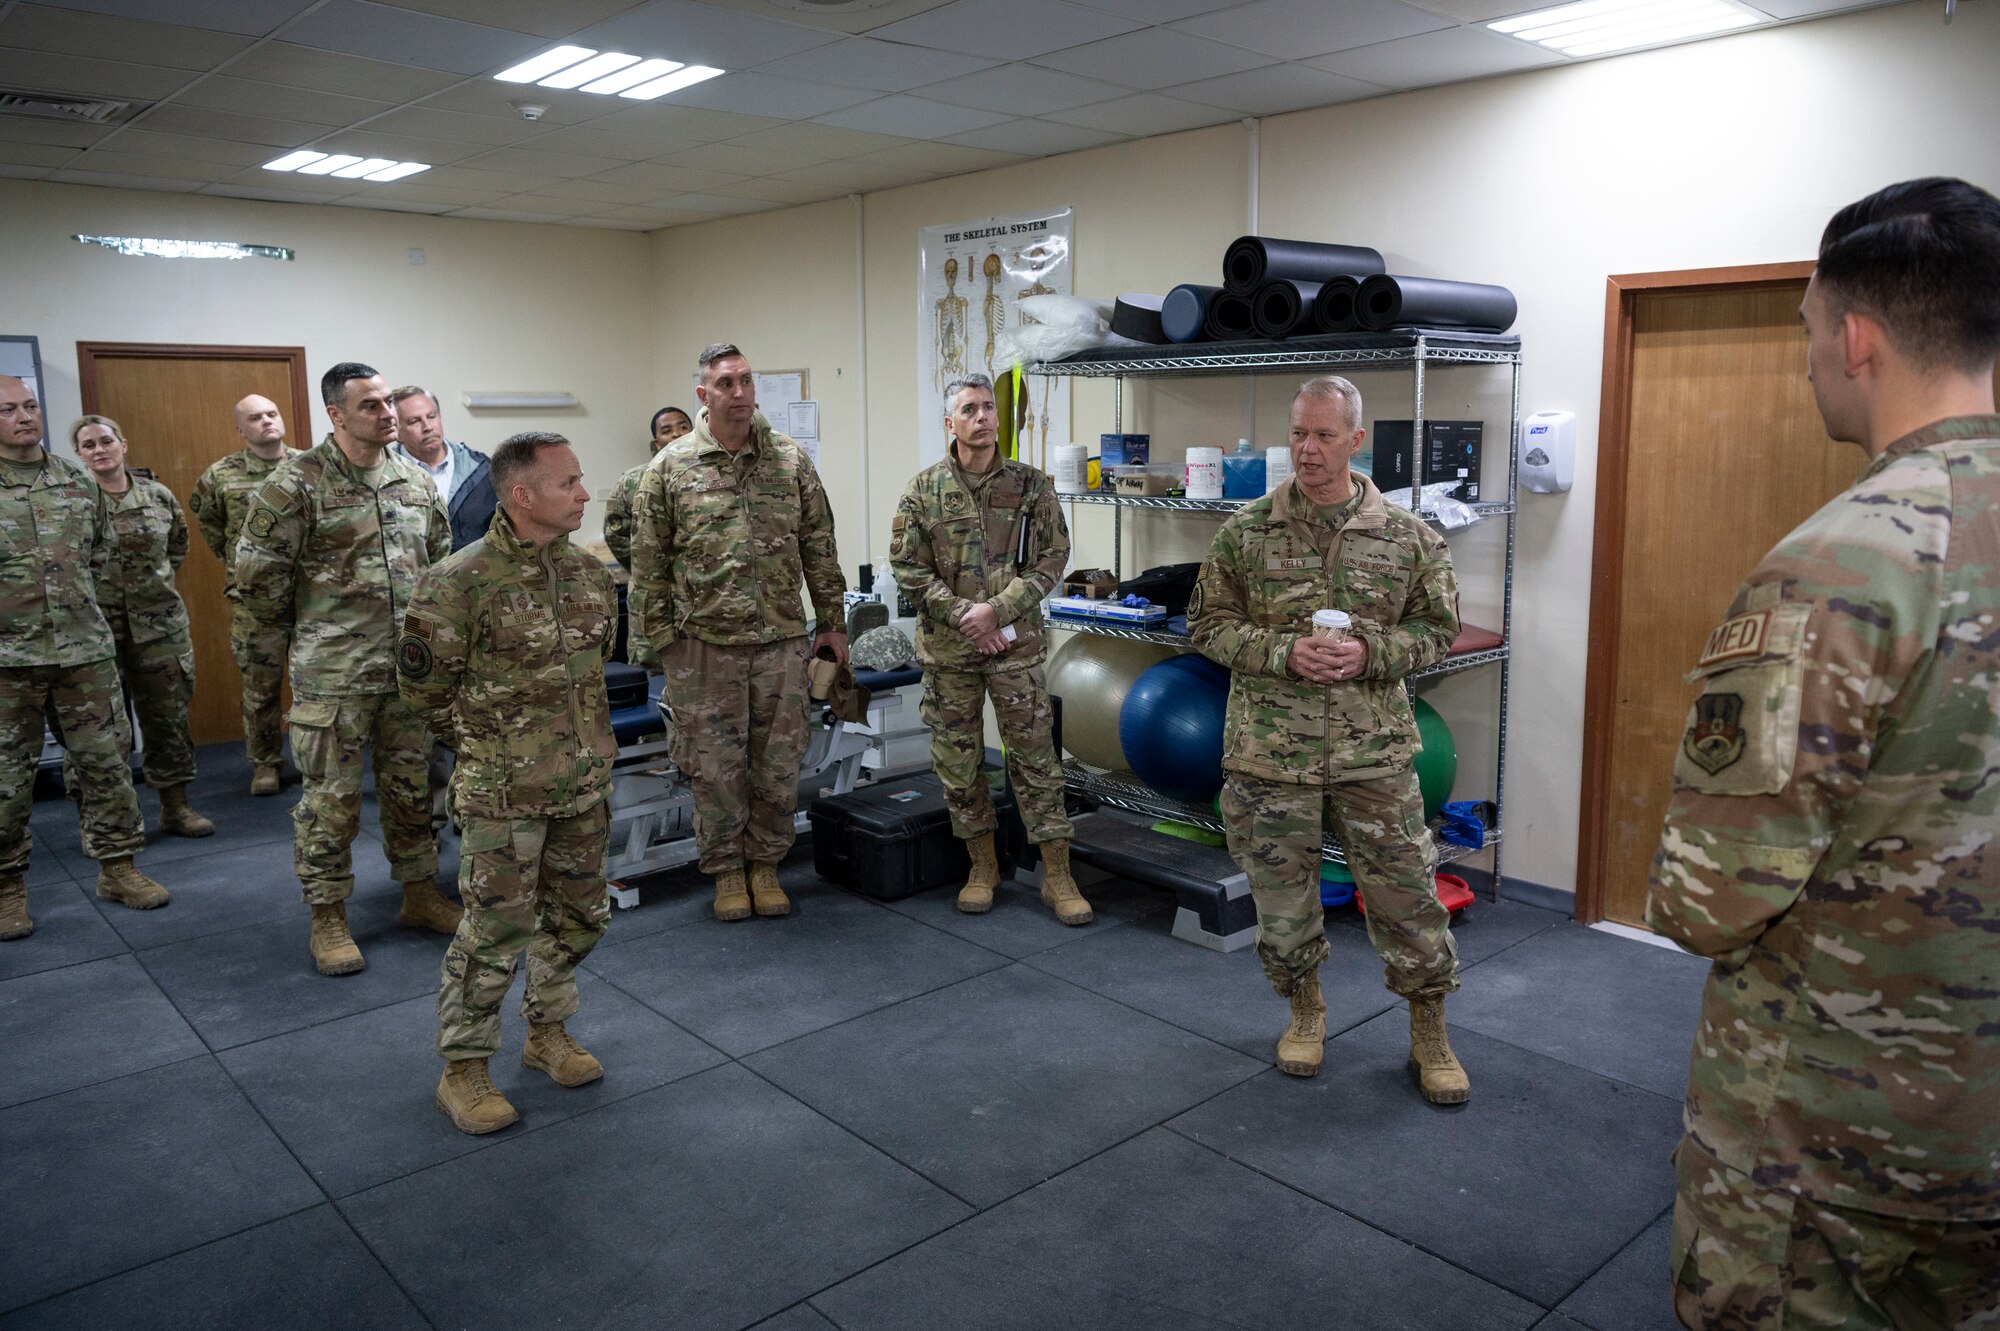 U.S. Air Force Gen. Mark Kelly, commander of Air Combat Command and Command Chief Master Sgt. John Storms, ACC, learn about physical therapy benefits offered to Airmen during a tour at Ali Al Salem Air Base, Kuwait, Feb. 15, 2023.